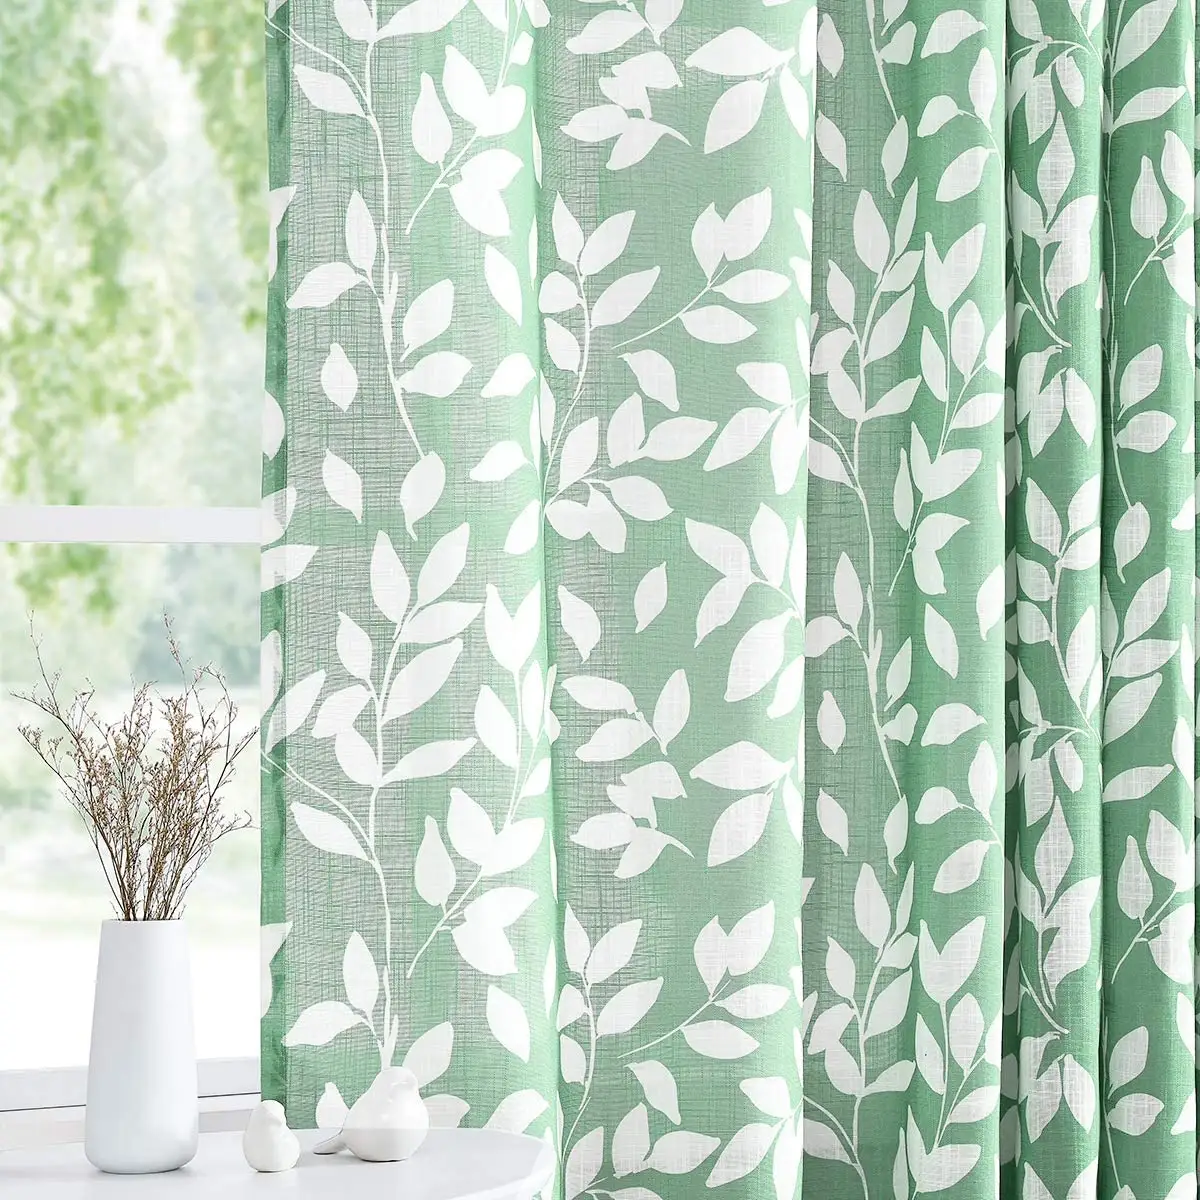 Green White Living Room Leaf Printed Linen Textured Semi Sheer Drapes for Dining Kitchen